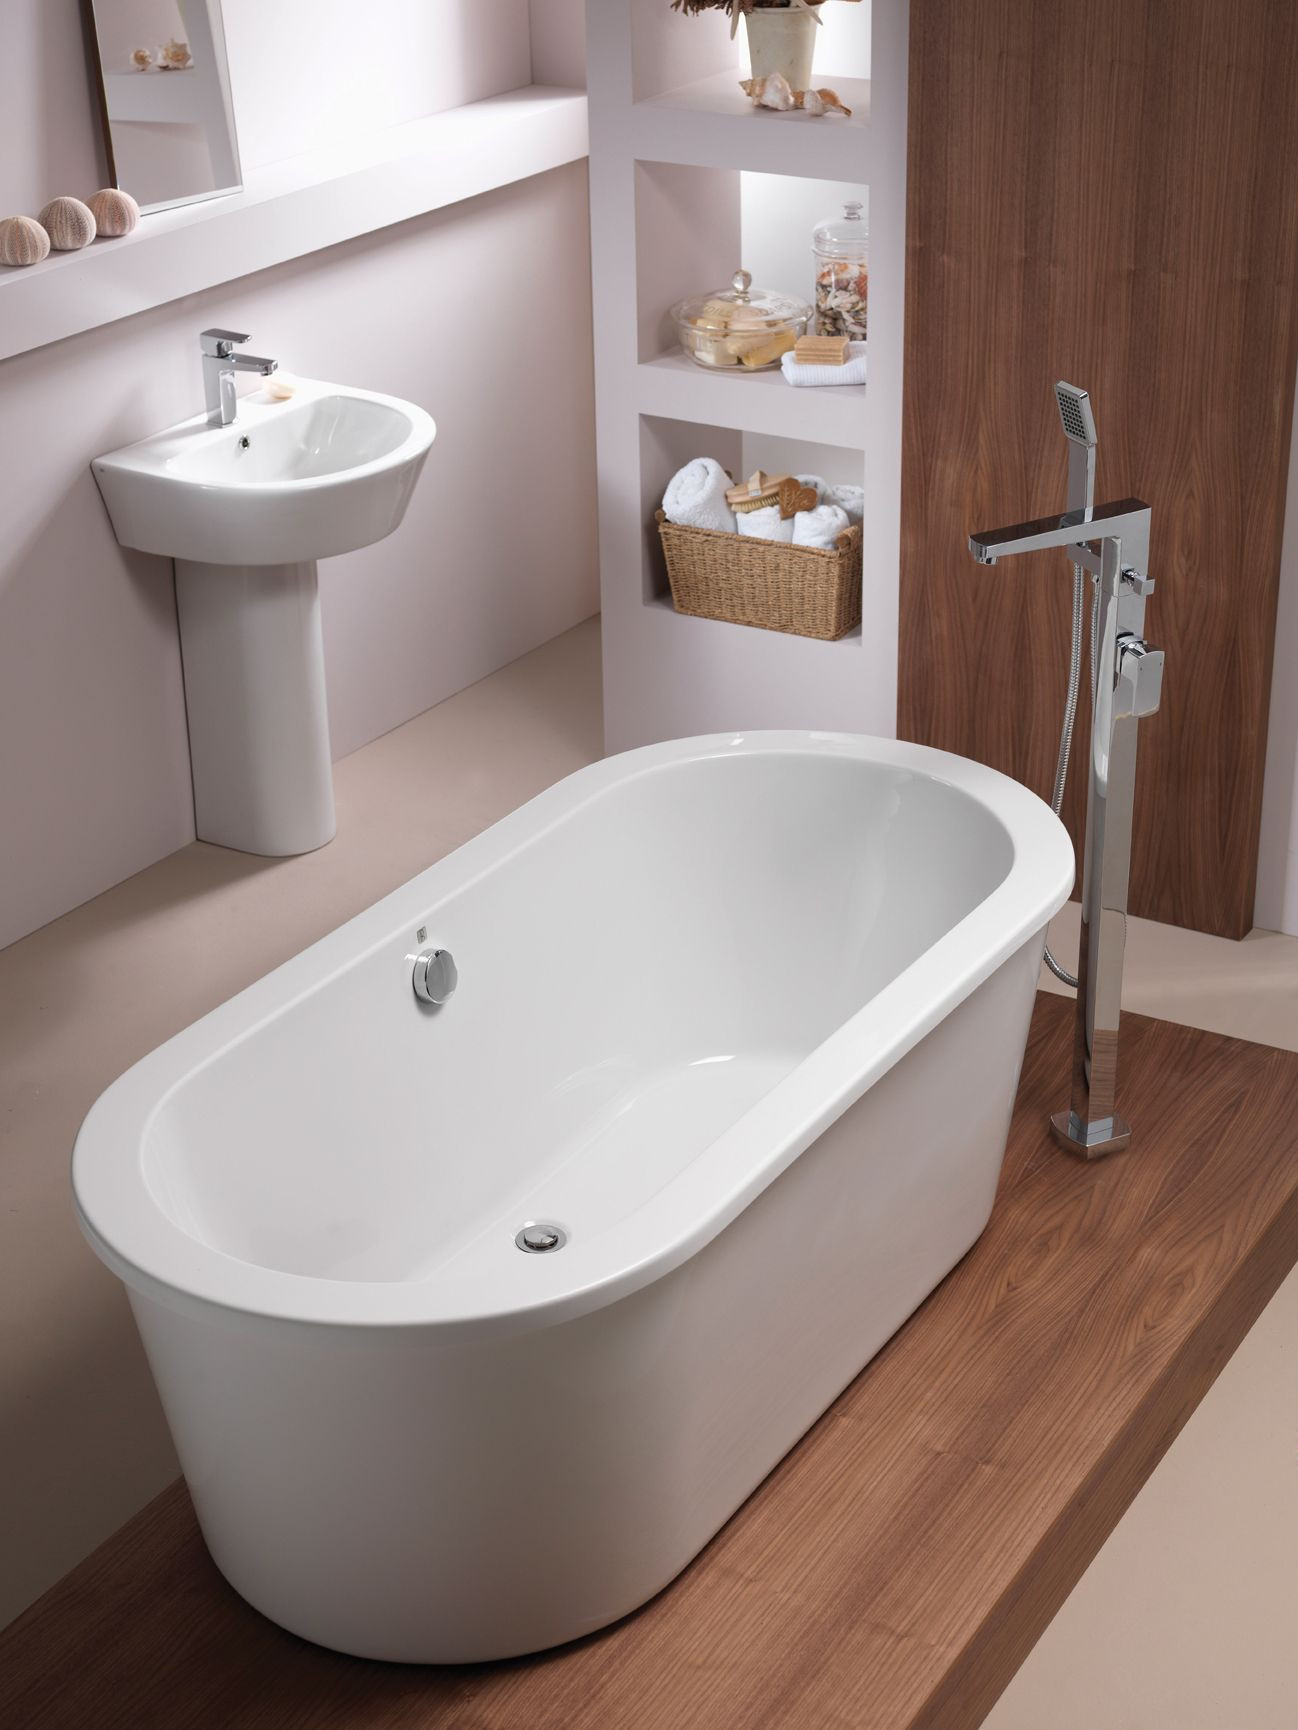 Freestanding Tub In Small Bathroom
 How to Choose the Best Freestanding Bath for Your Bathroom